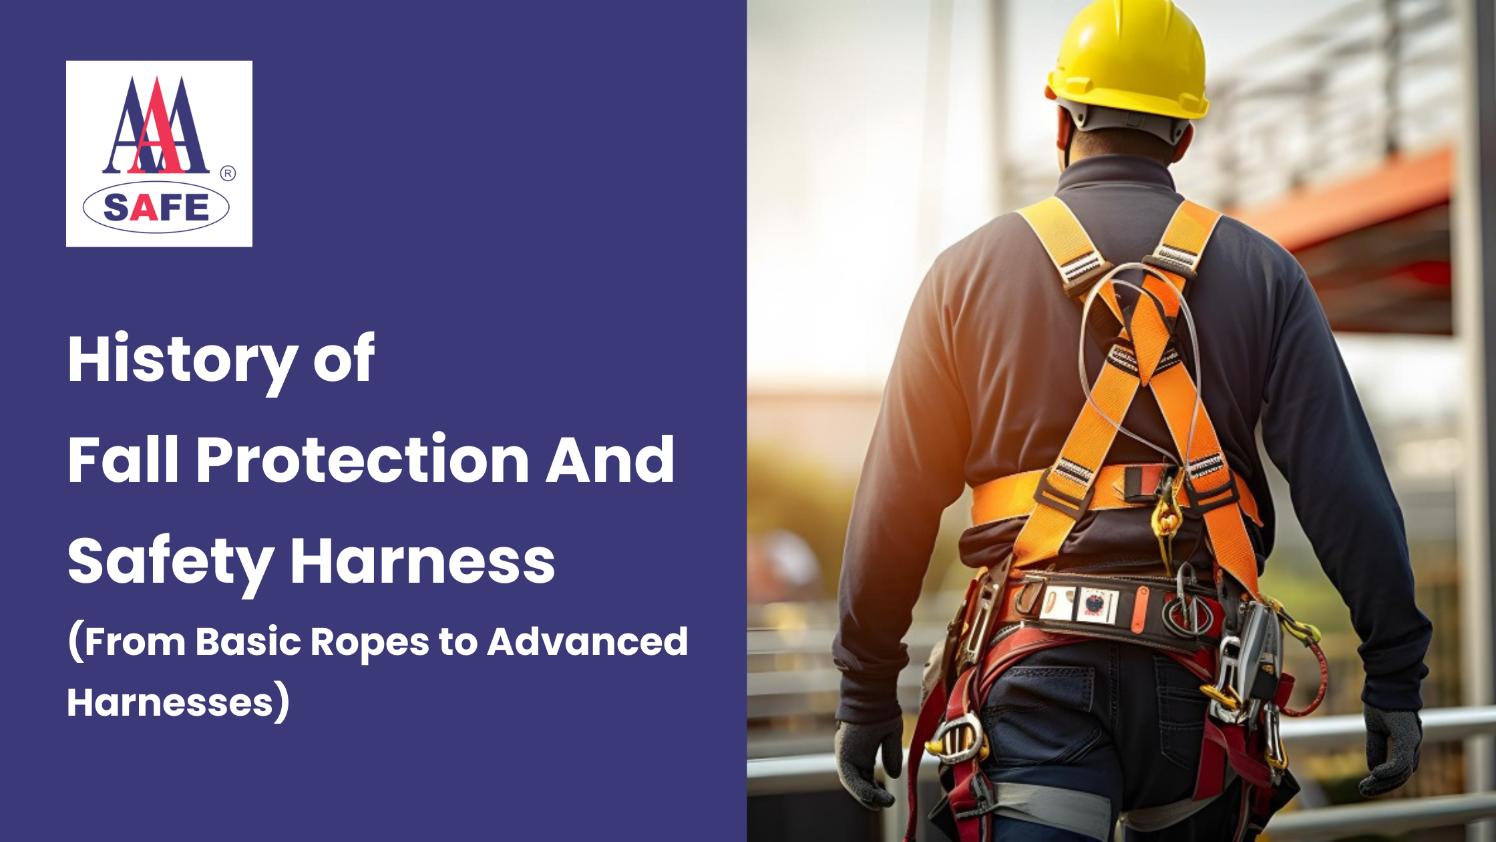 History of Fall Protection And Safety Harness (From Basic Ropes to Advanced Harnesses)